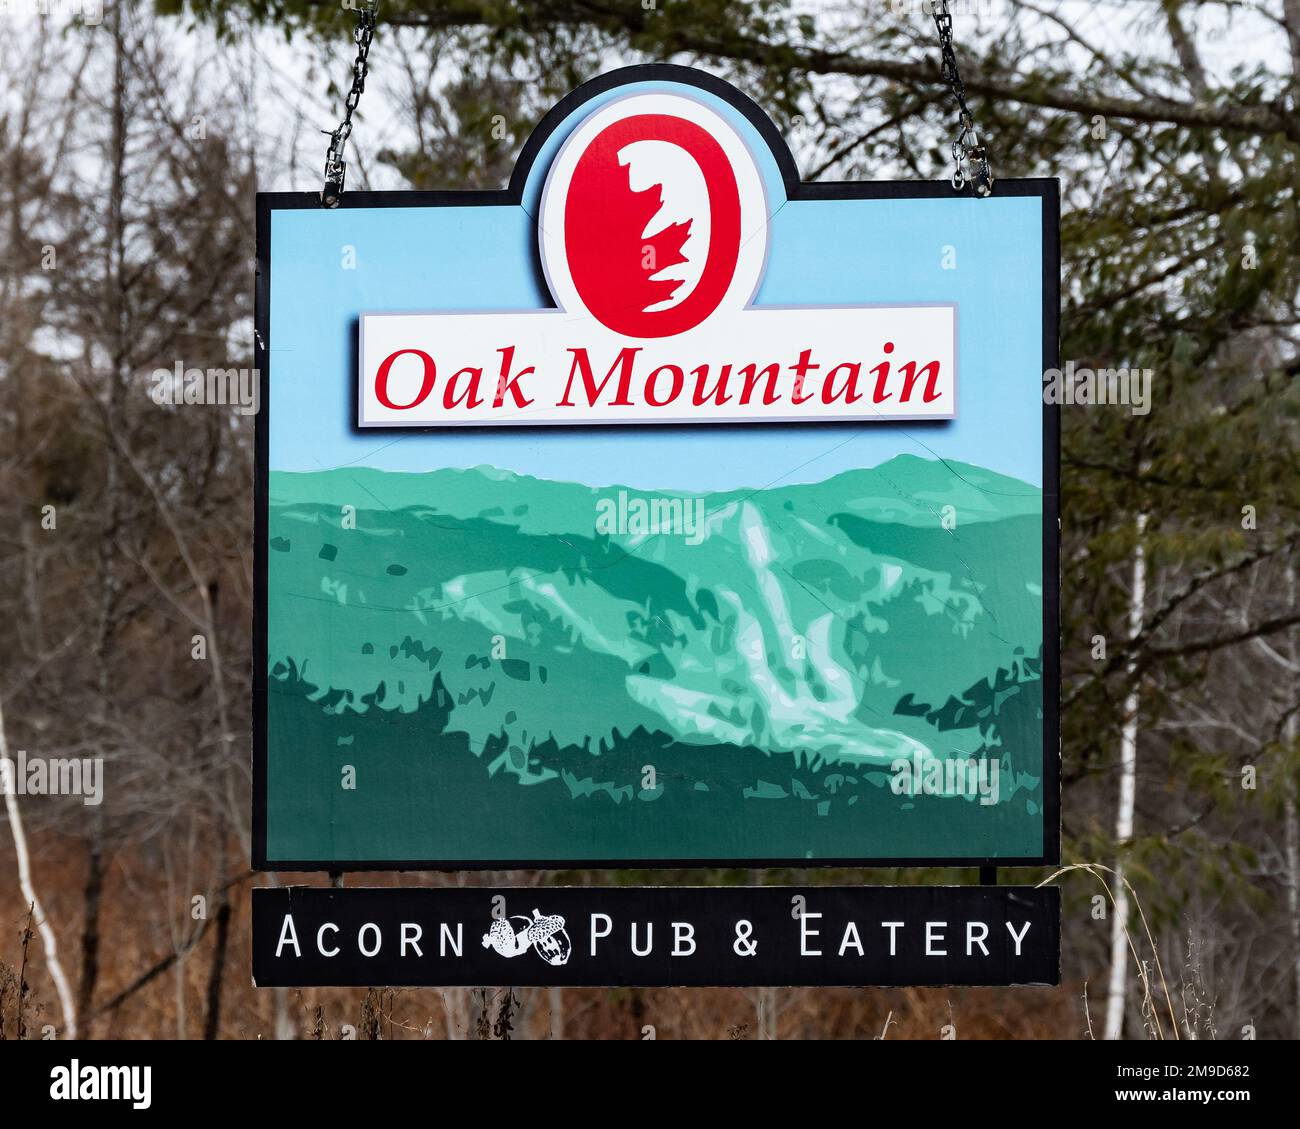 A road sign for Oak Mountain sky center and the Acorn Pub and Eatery in Speculator, NY in the Adirondack Mountains Stock Photo